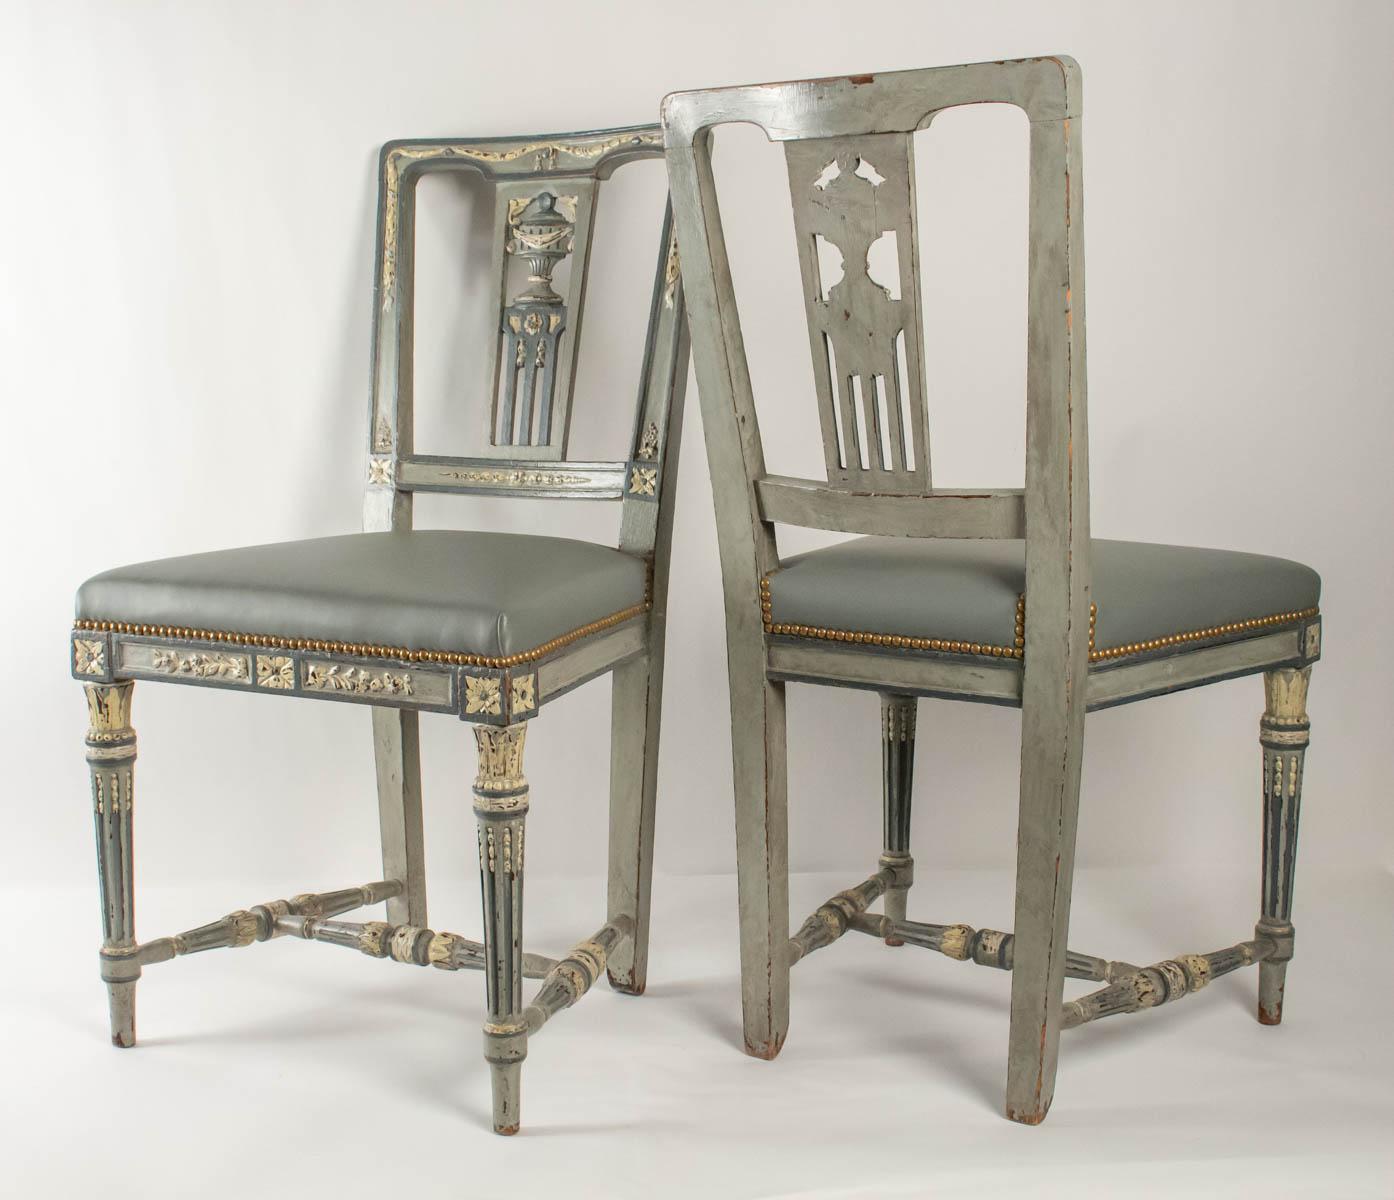 Pair Of Chairs Louis XVI Style From The 19th Century, Antiquity 1